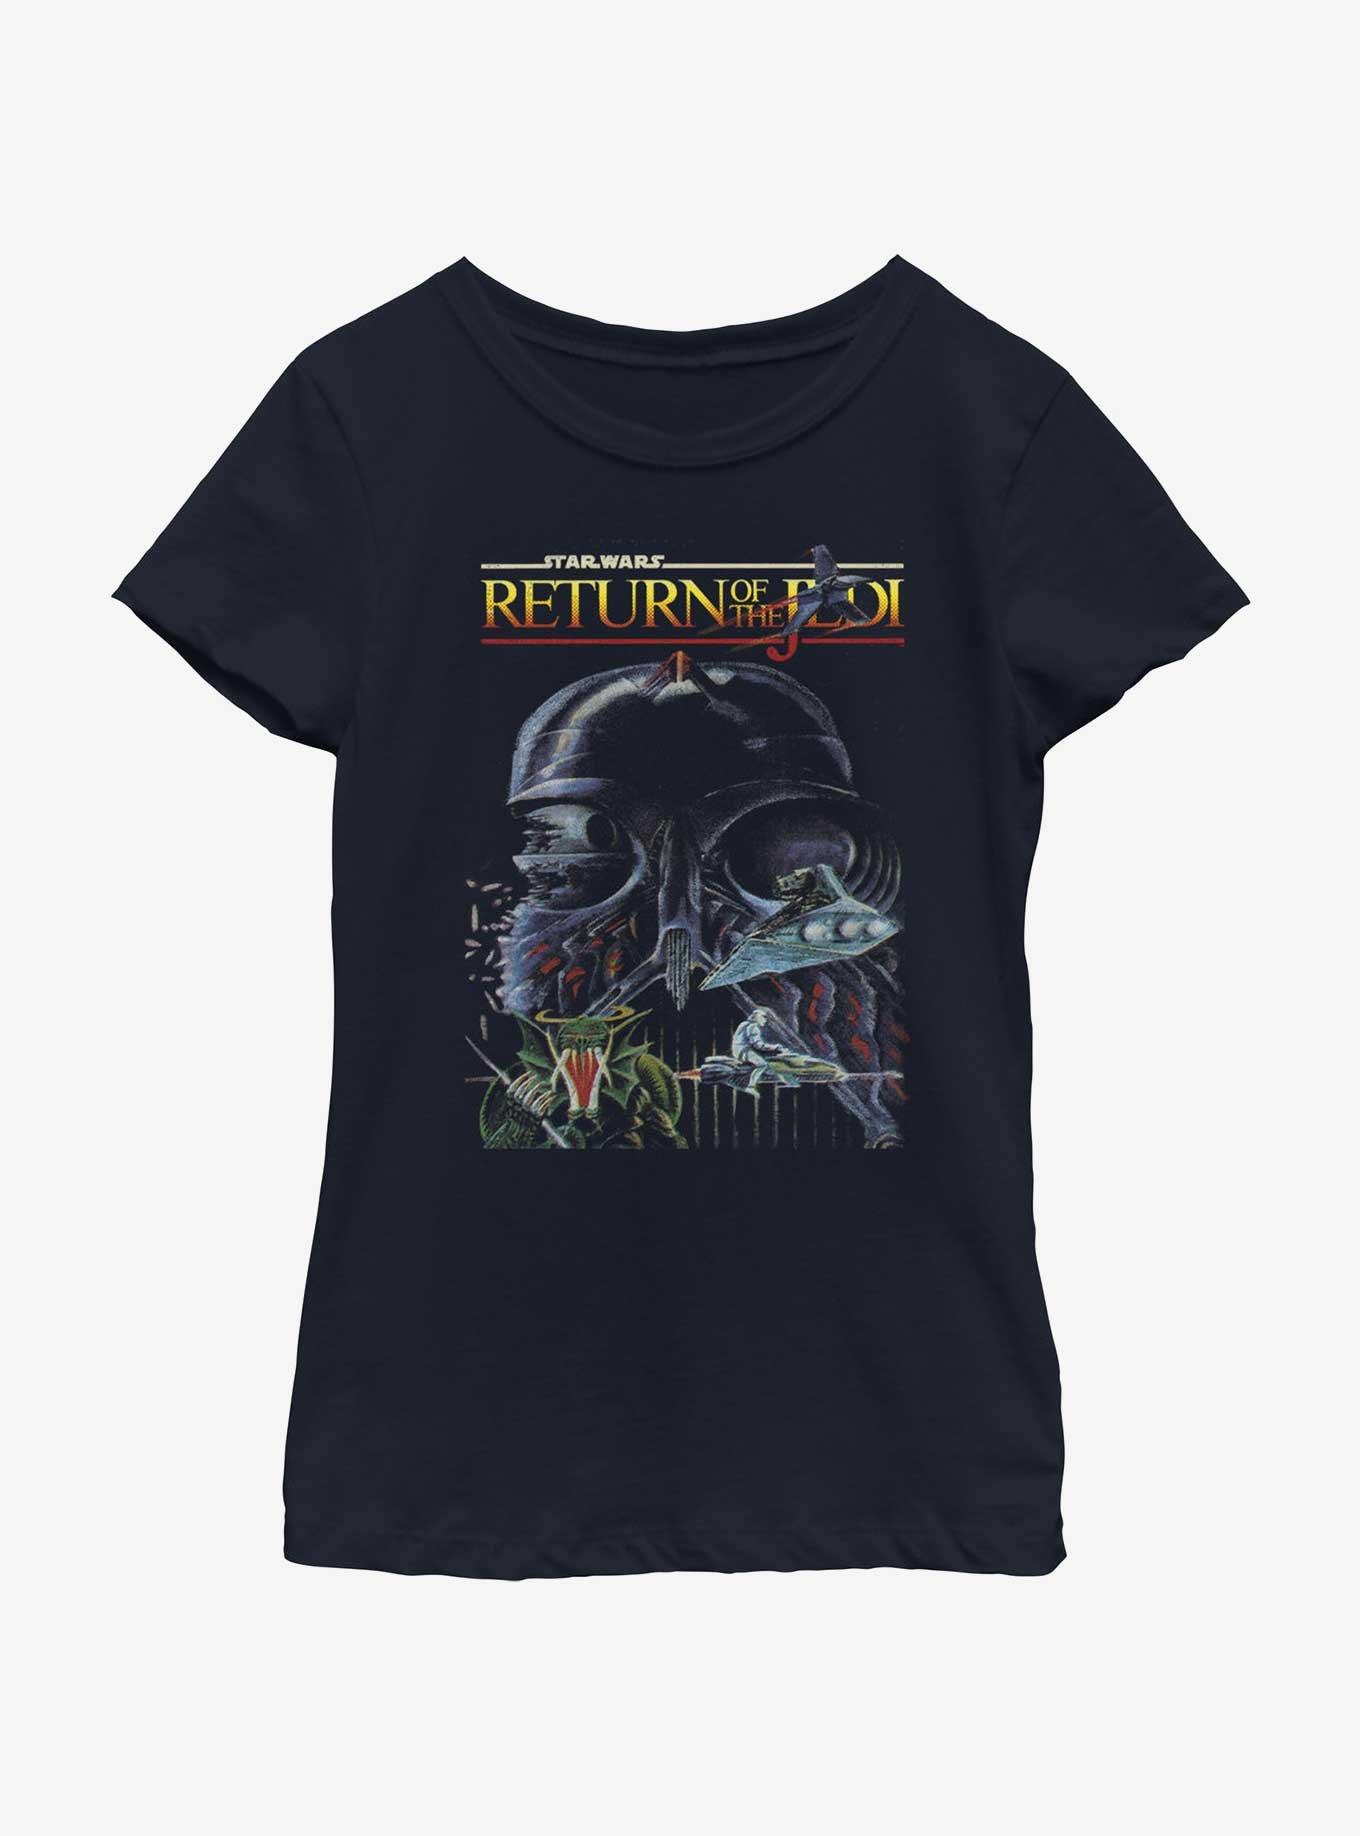 Star Wars Return Of The Jedi Concept Art Poster Youth Girls T-Shirt, NAVY, hi-res